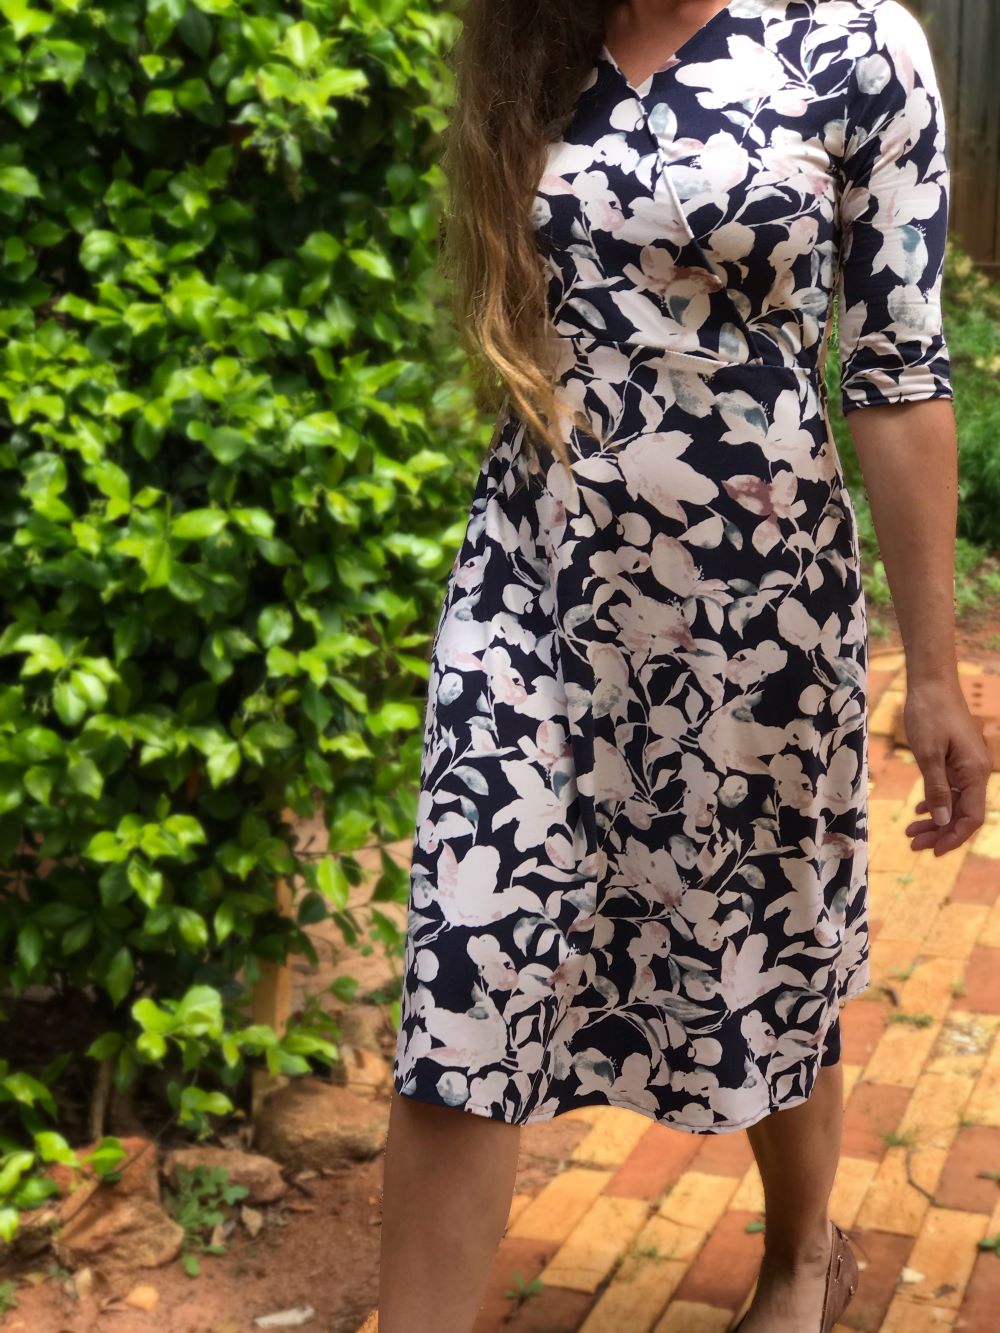 bringing feminine fashion back with midi dresses and skirts, floral fabric, and classic pieces